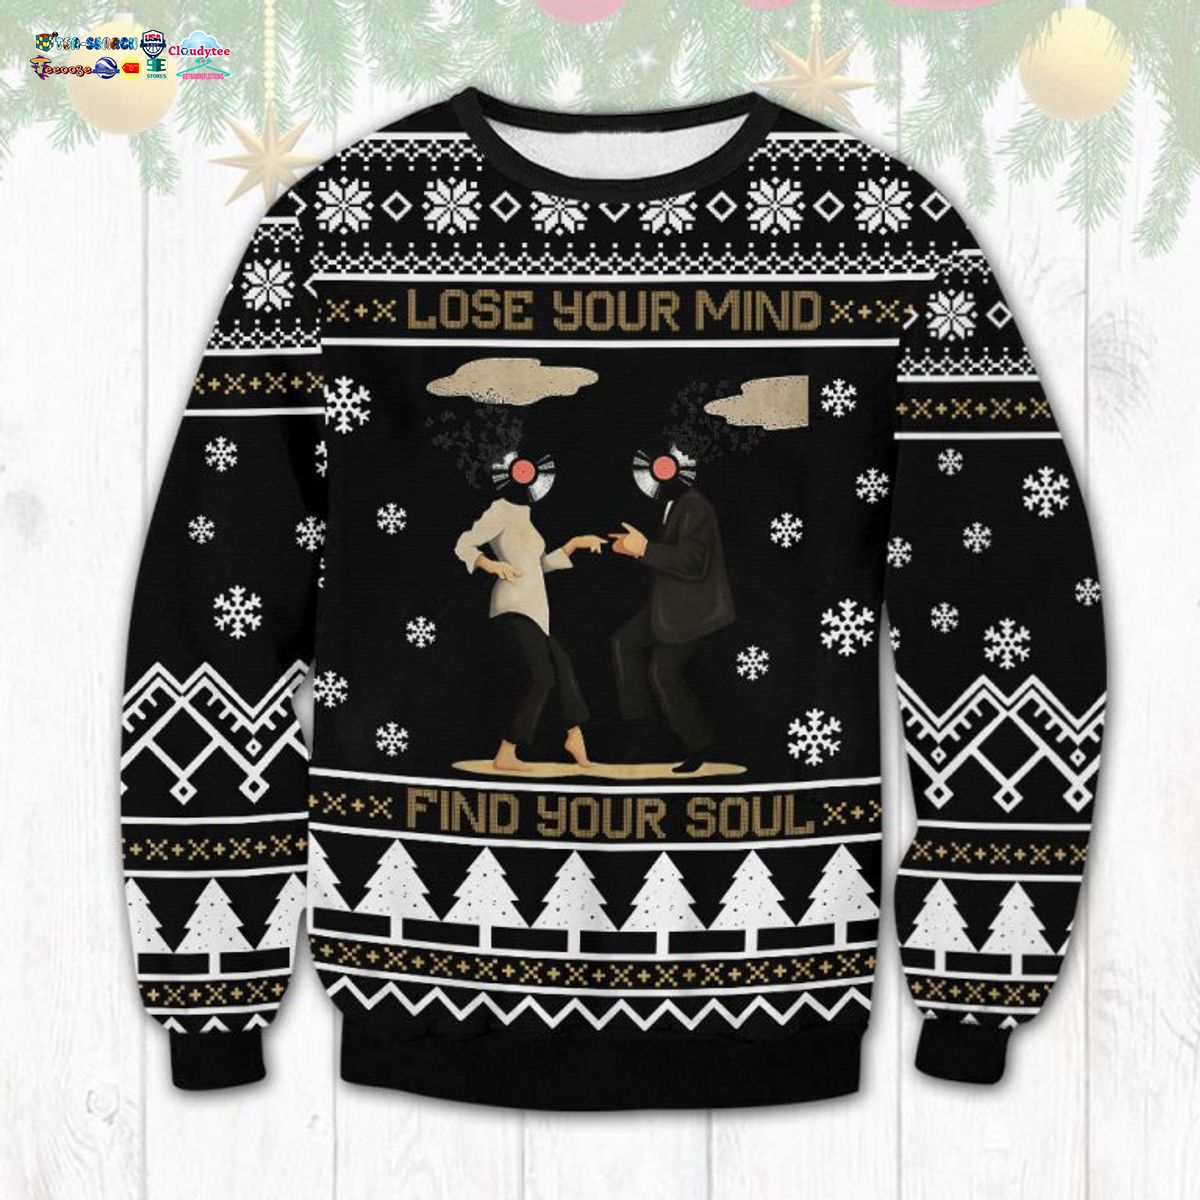 pulp-fiction-lose-your-mind-find-your-soul-ugly-christmas-sweater-1-Hqb3t.jpg